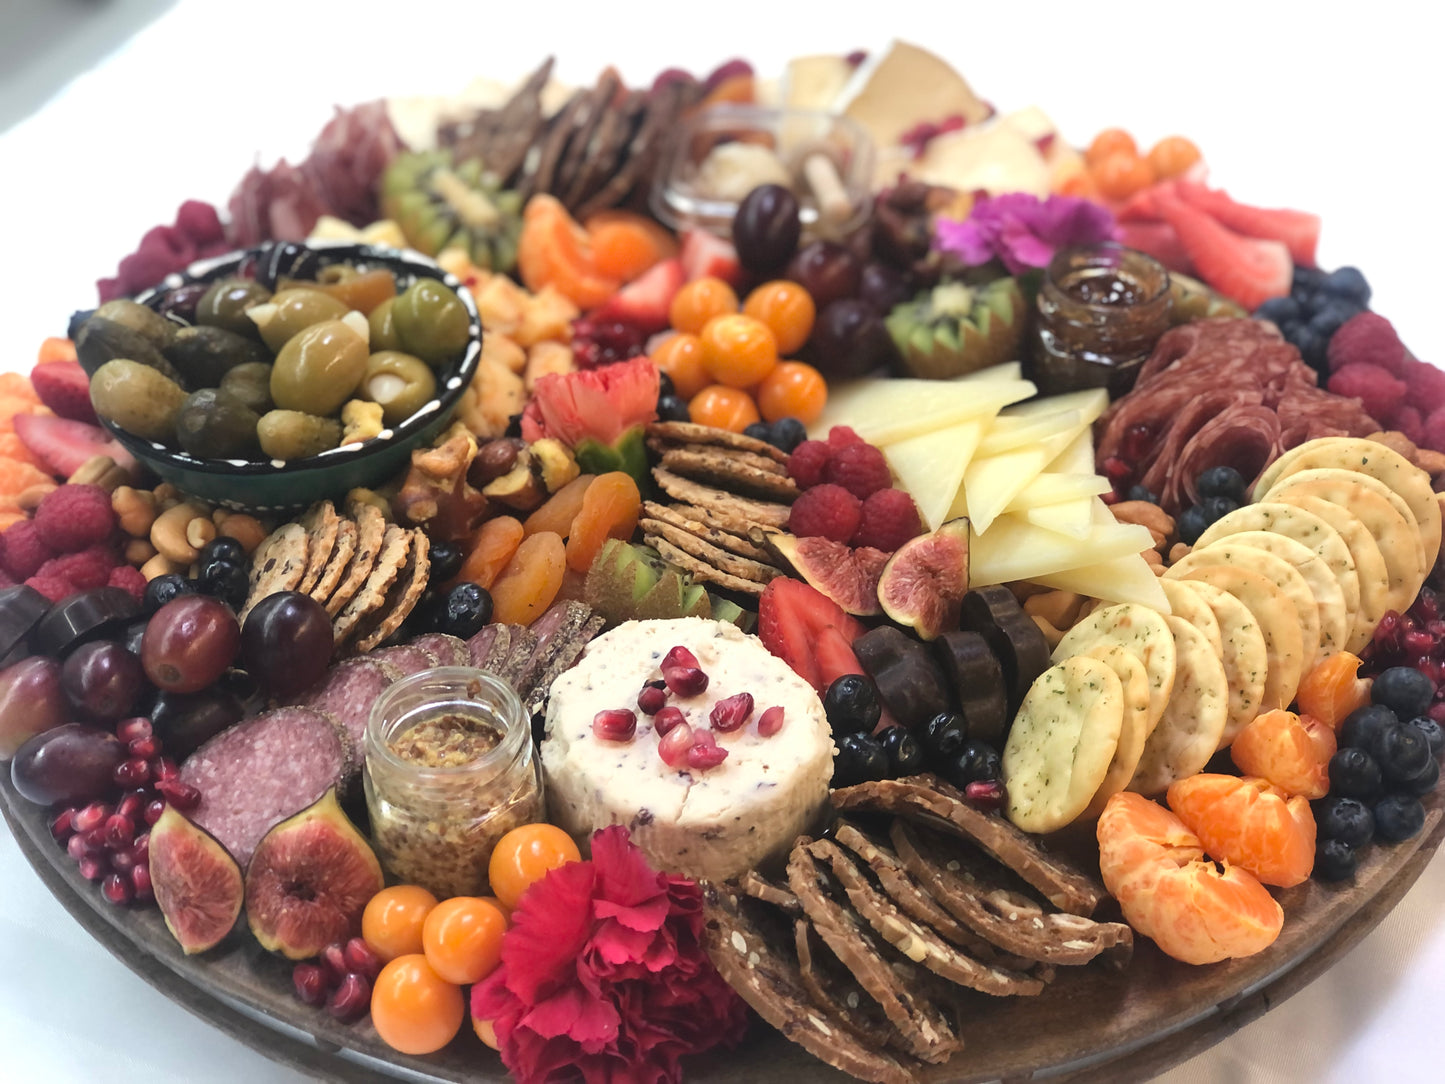 Seasonal Nibbles Charcuterie Board - Large Round Board (18 inches)